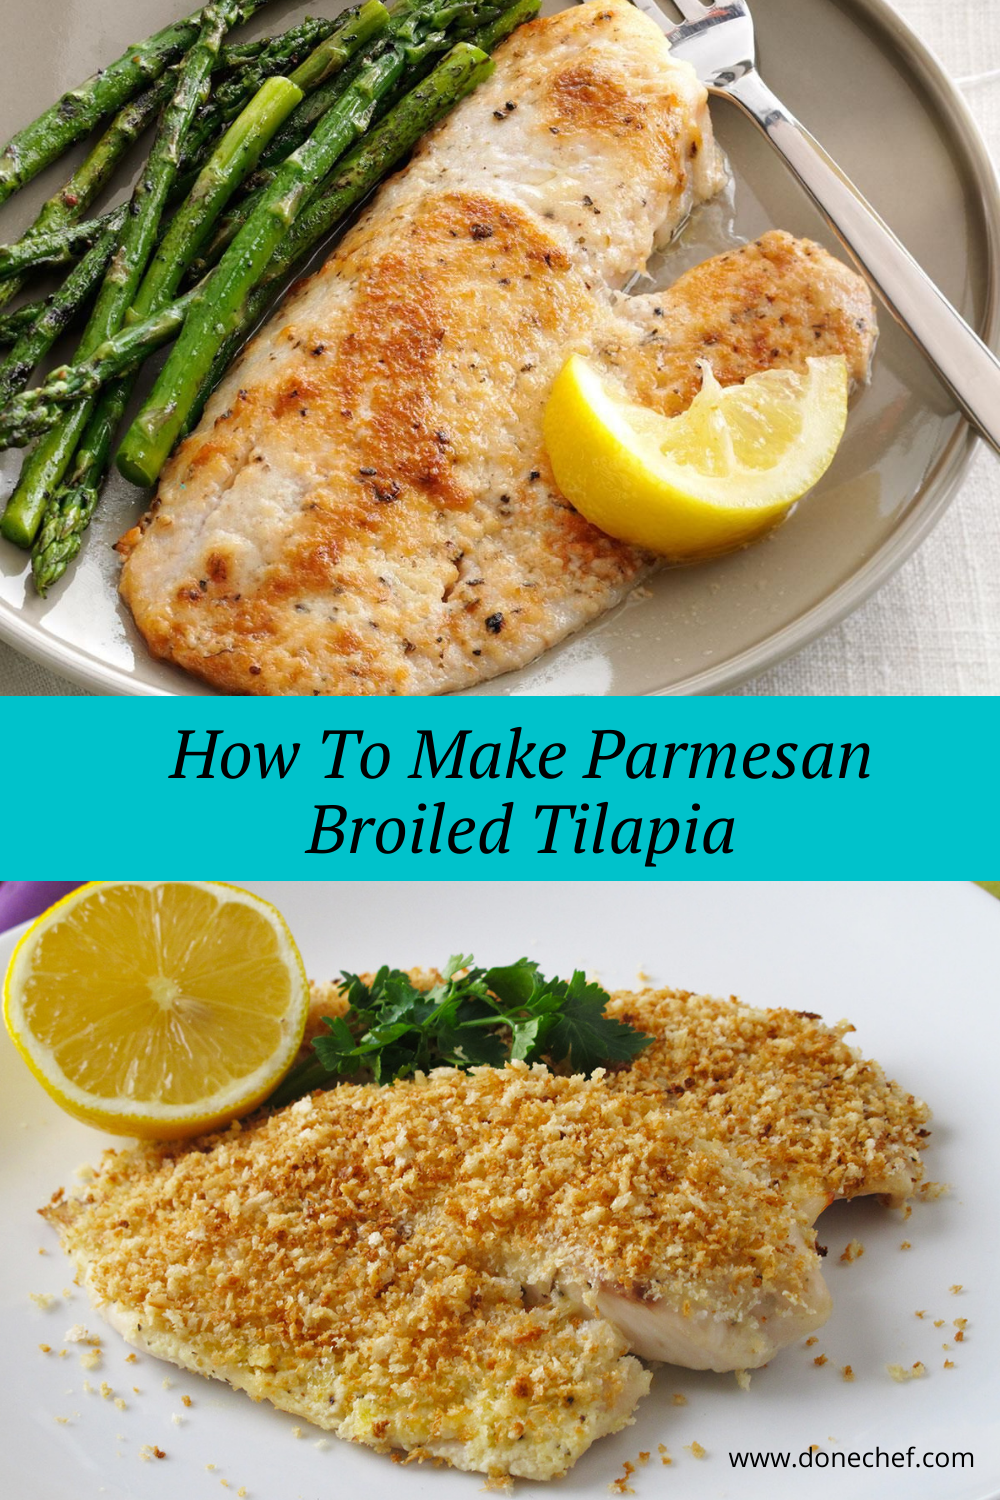 How To Make Parmesan Broiled Tilapia